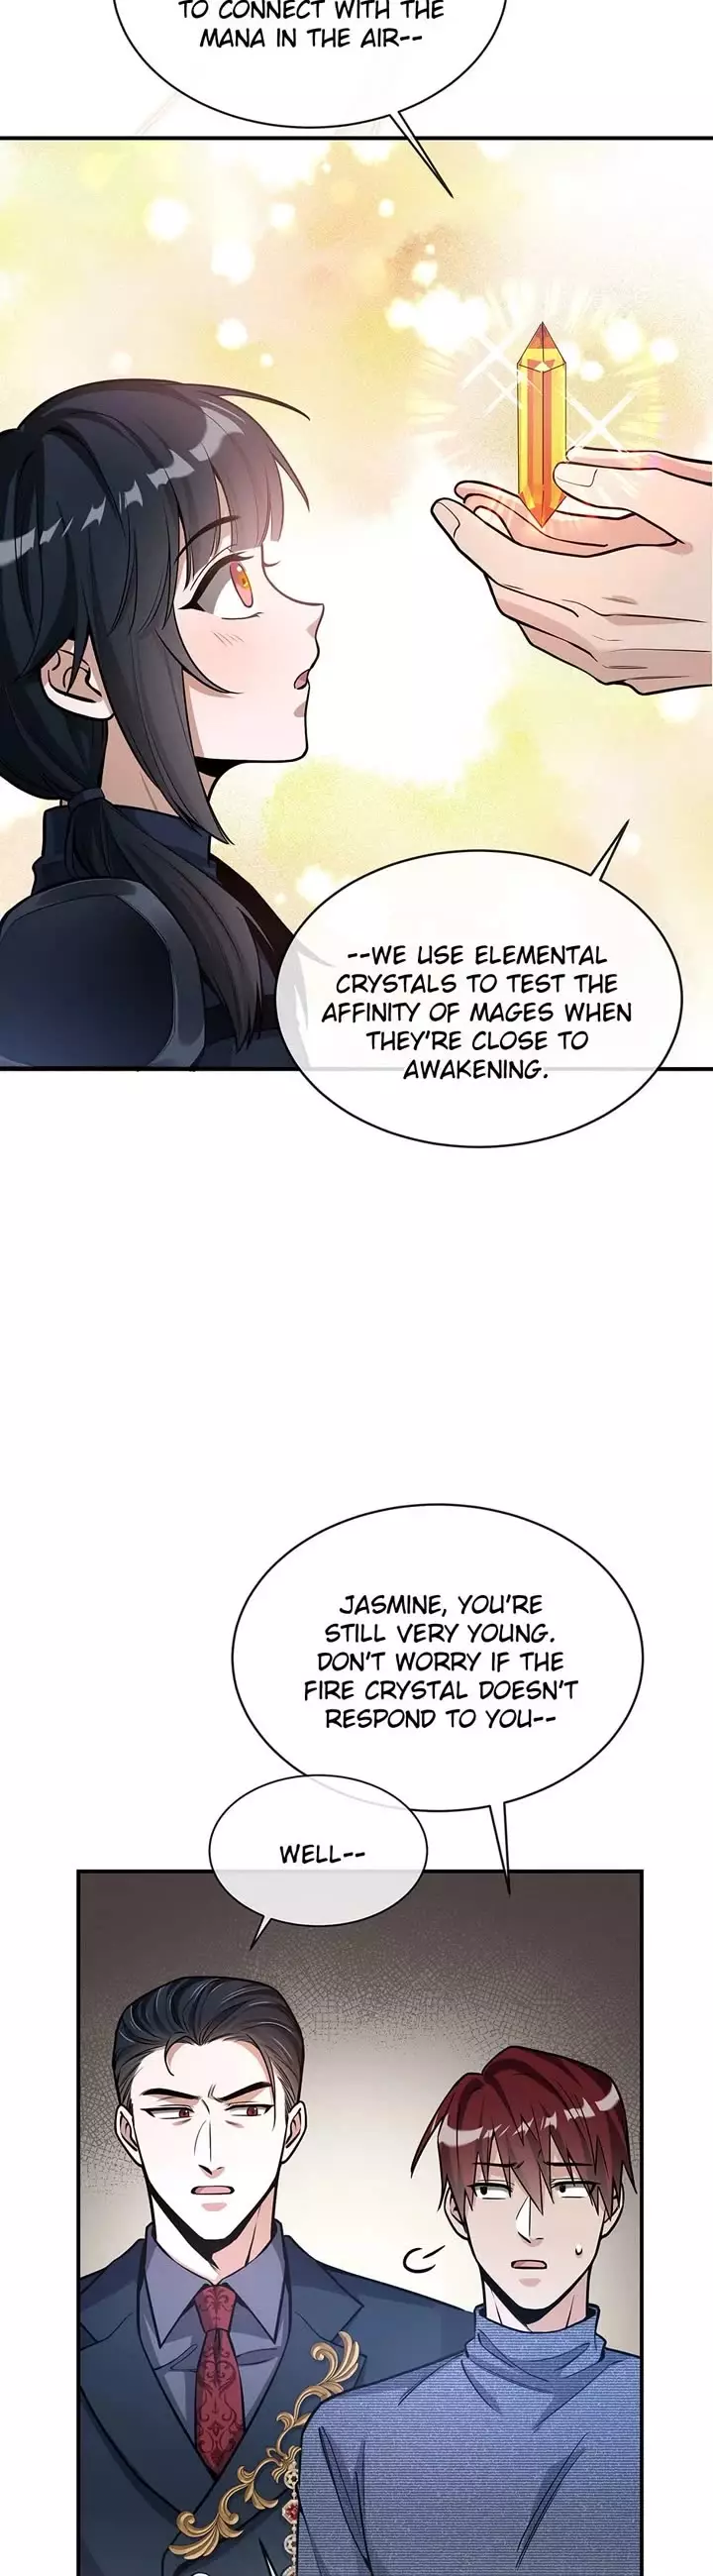 The Beginning After The End: Side Story - Jasmine: Wind-Borne - 2 page 20-f06552eb